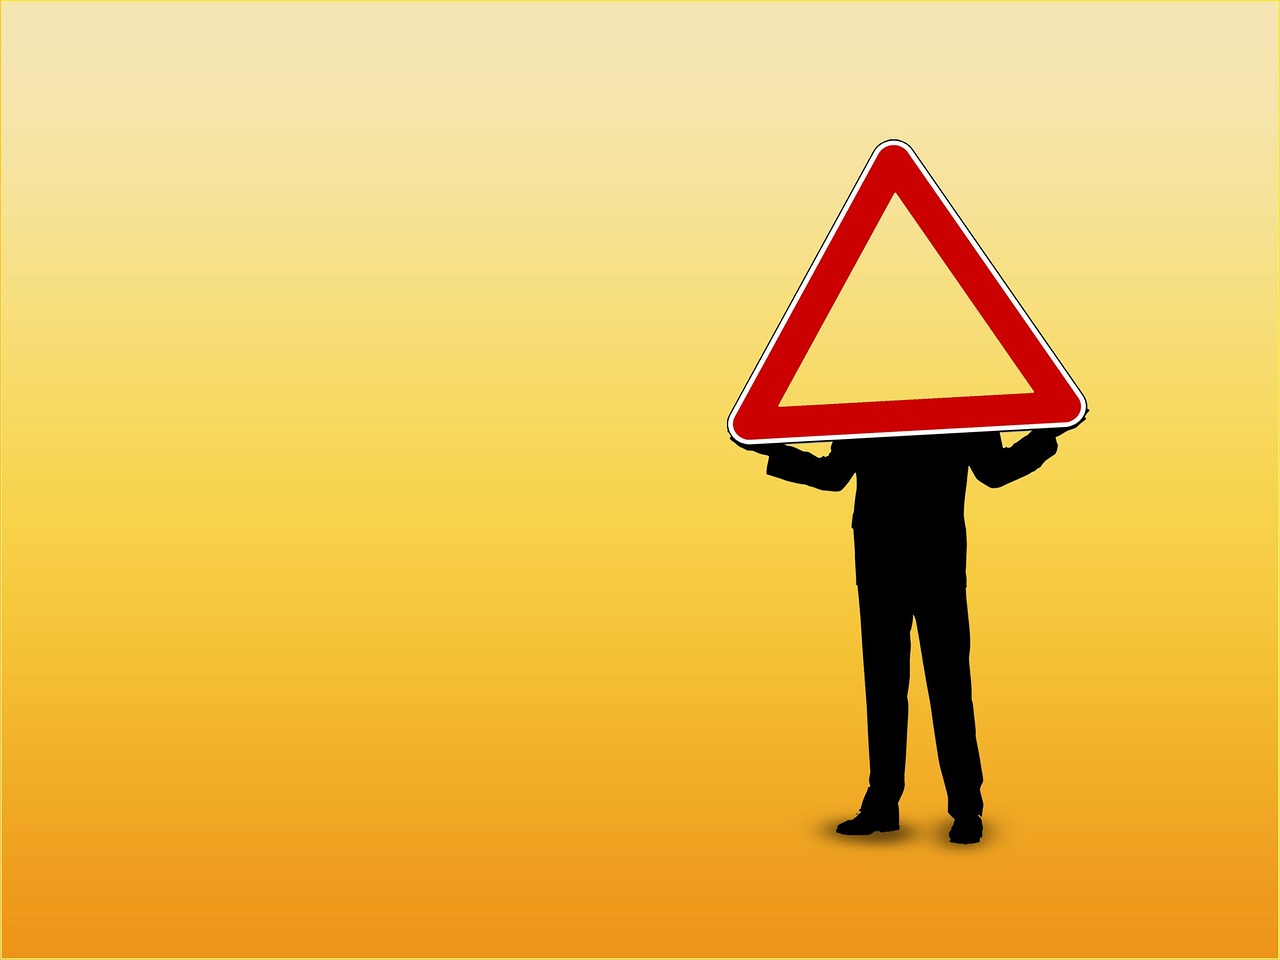 a man holding a red and white triangular sign, a picture, precisionism, vector background, yellow background, danger, traffic signs